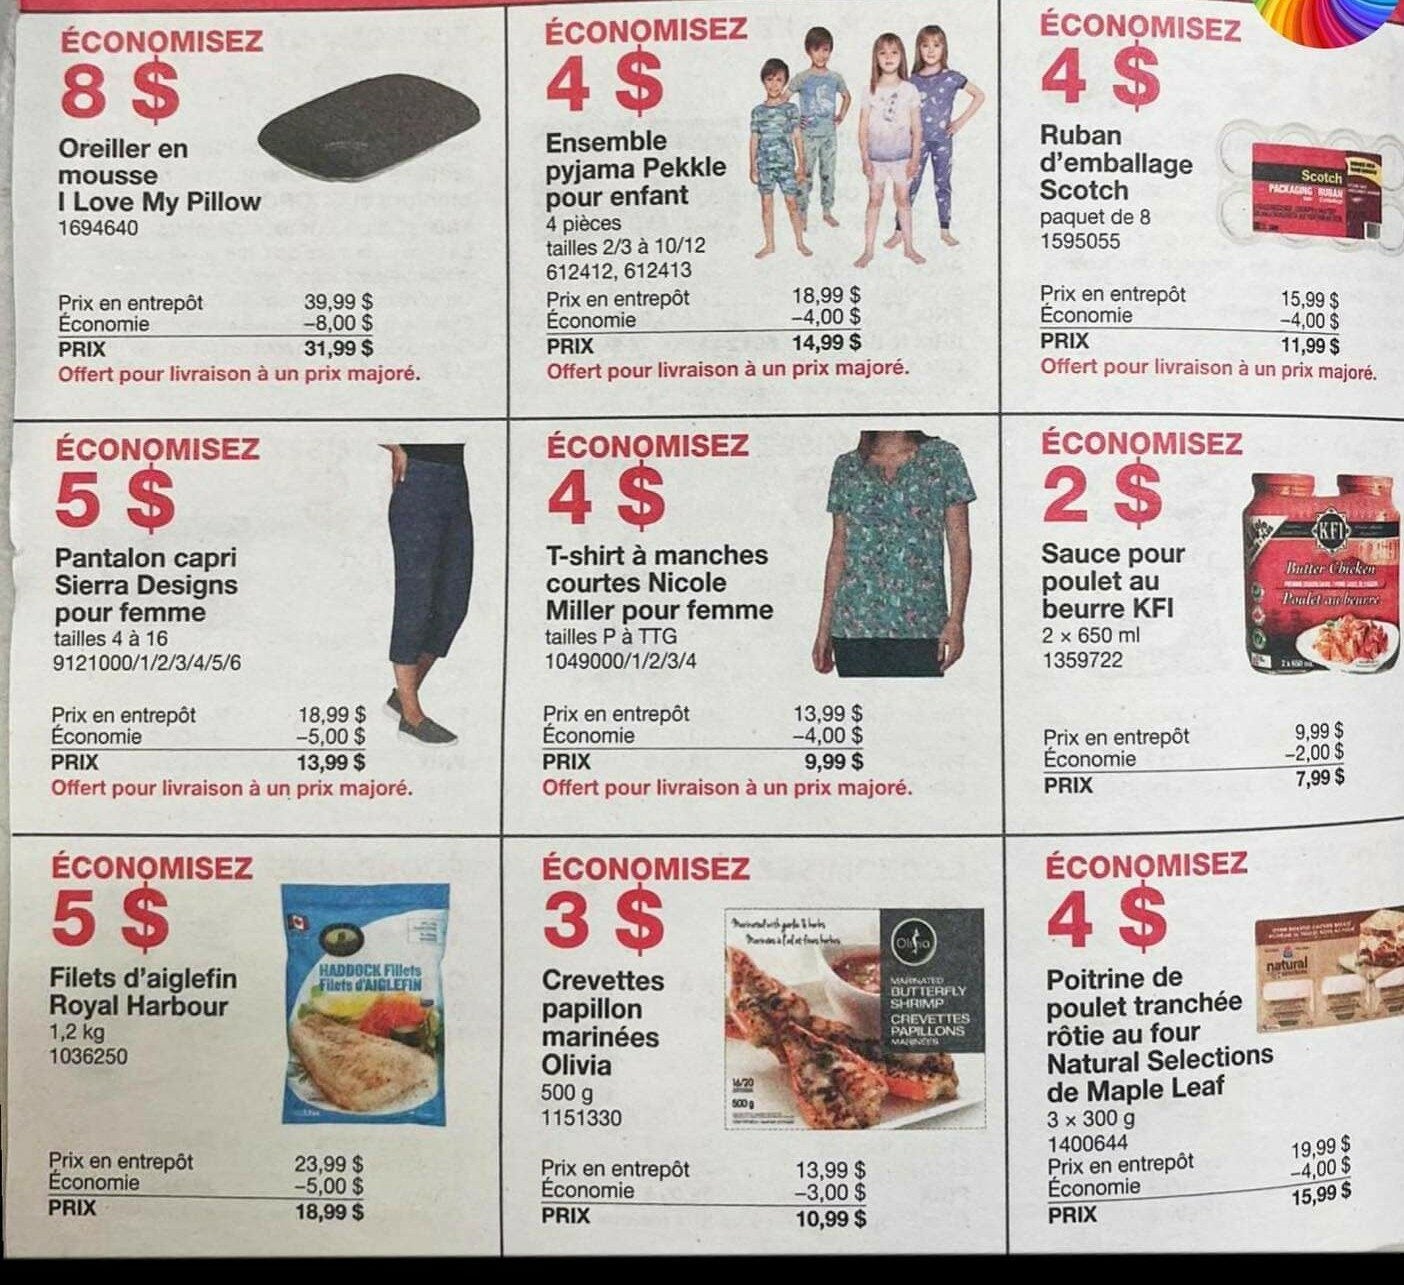 Costco] Instant Savings Flyer Feb. 27 - March 12 (ON, QC, NS, NB